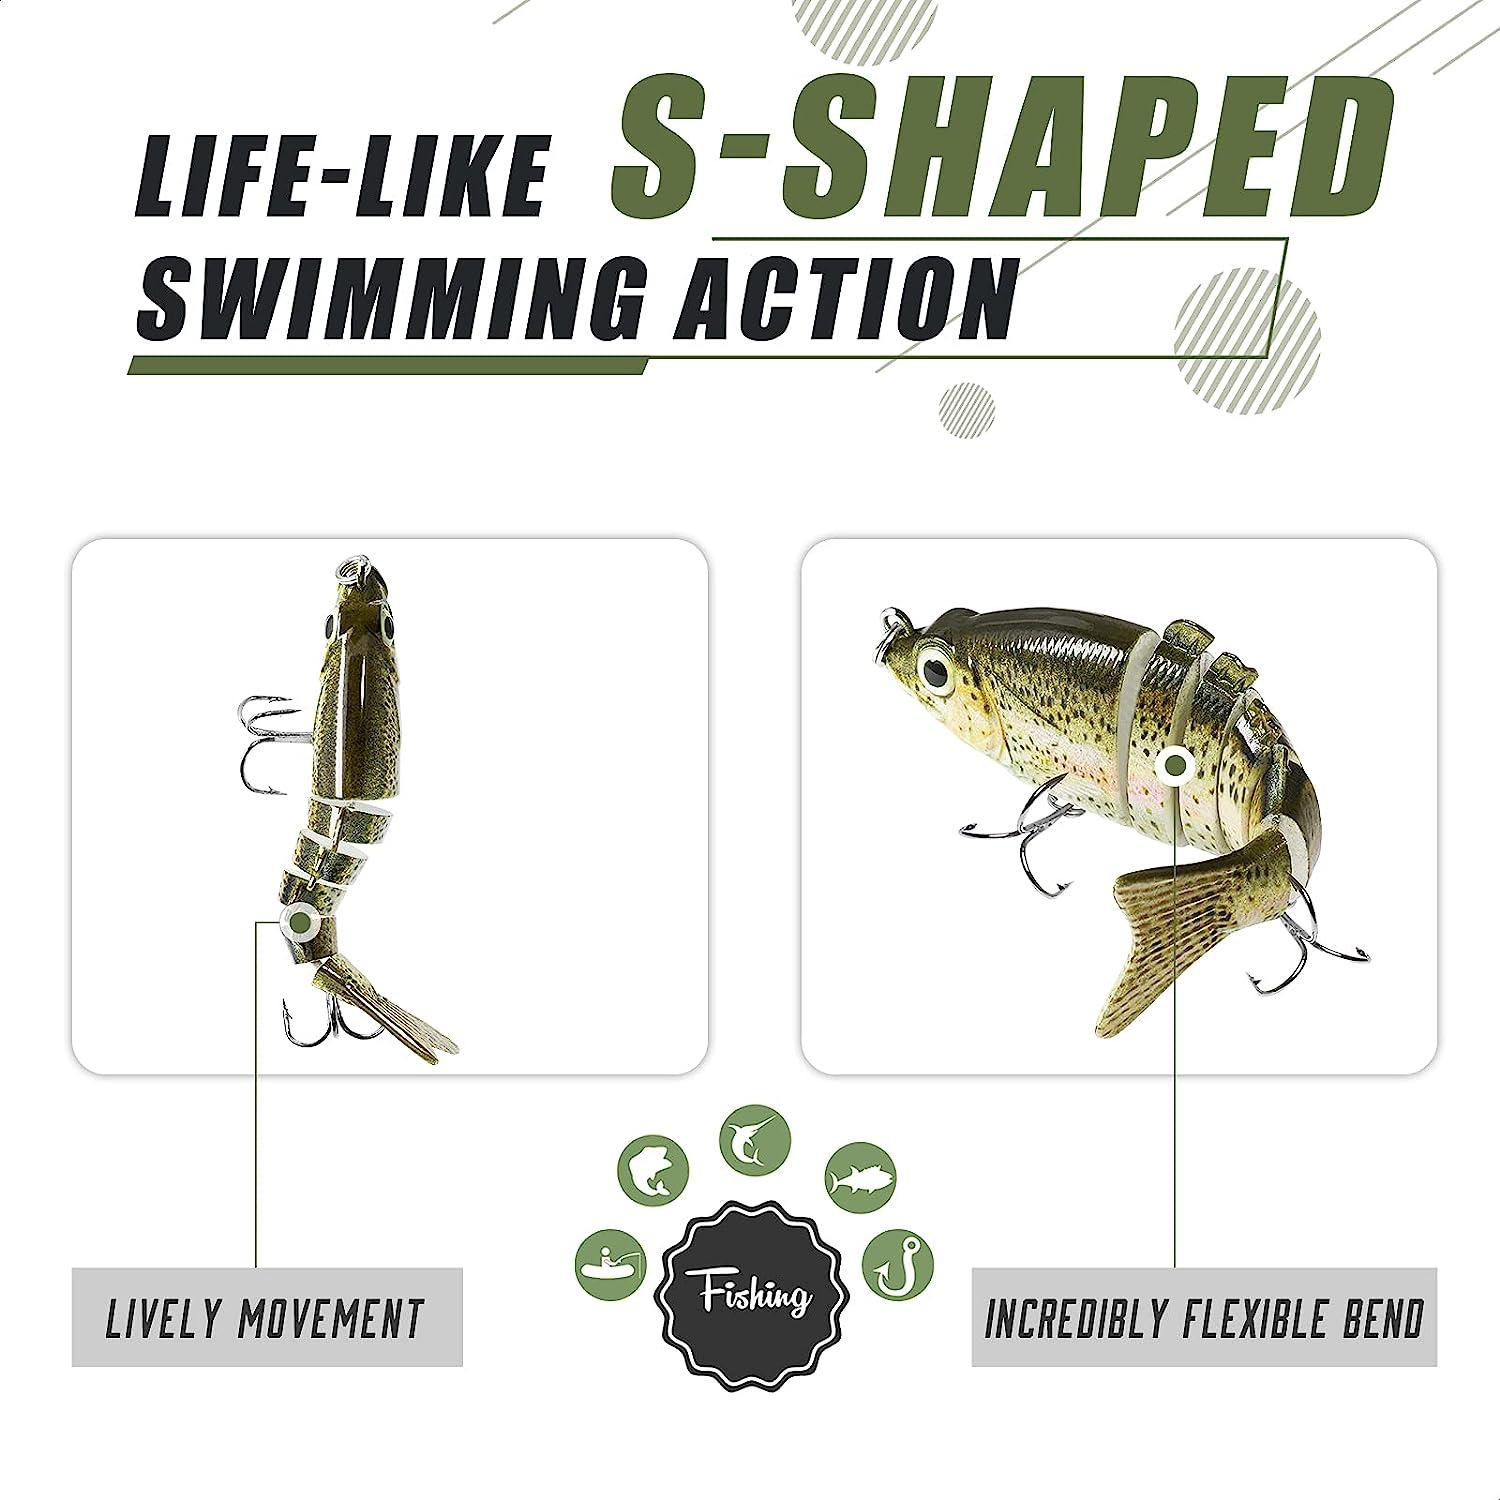  TRUSCEND Fishing Lures for Bass Trout Multi Jointed